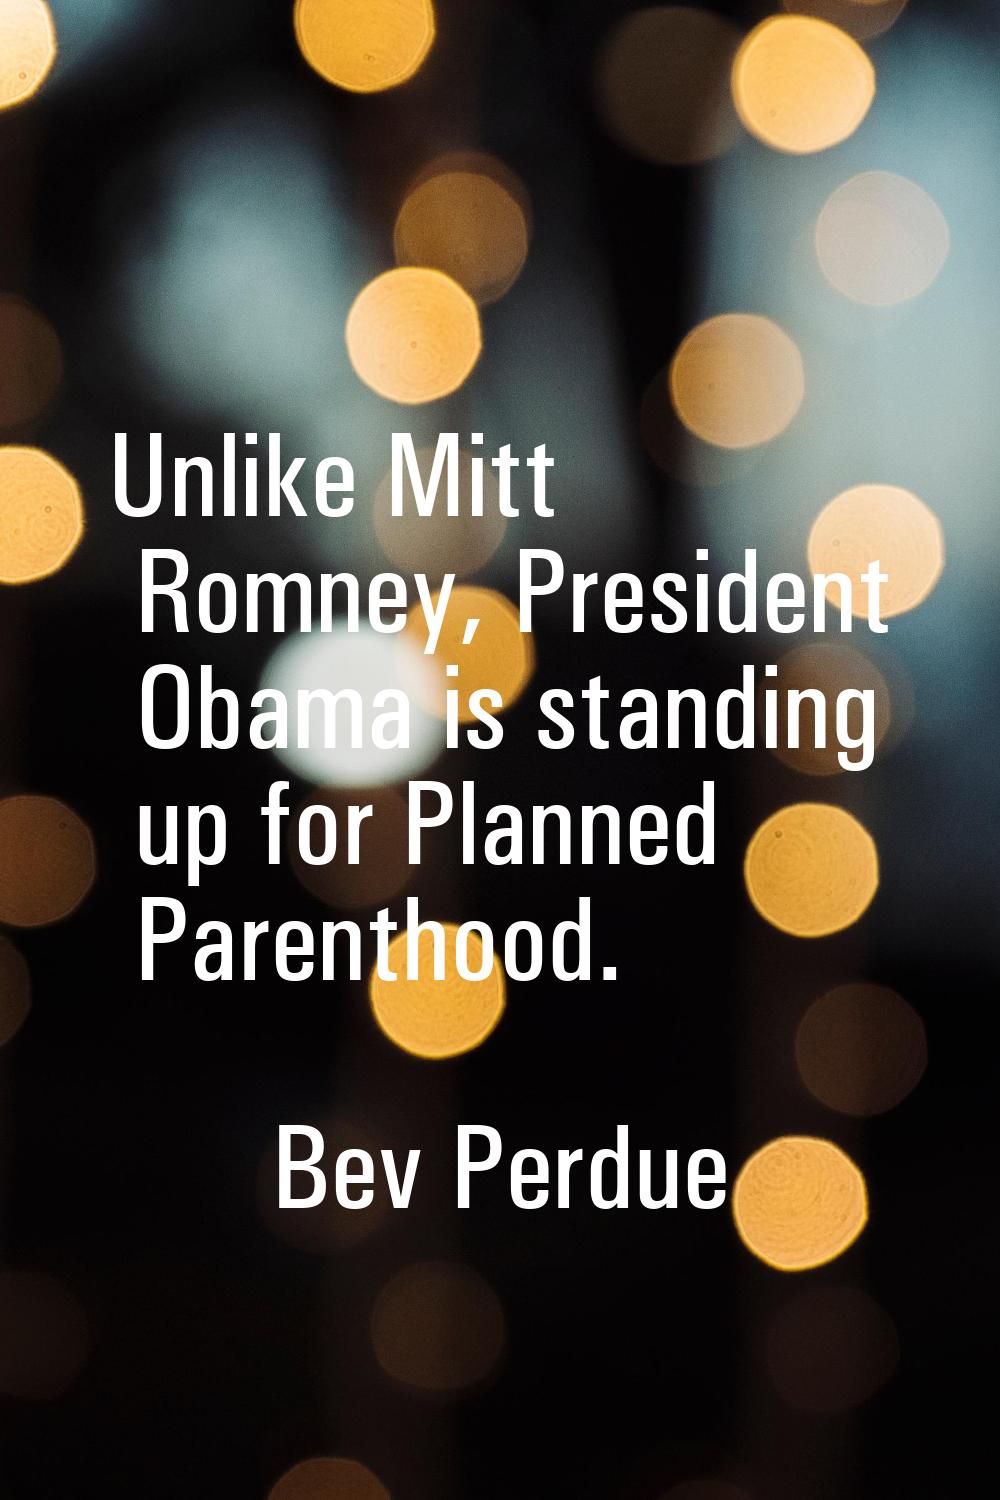 Unlike Mitt Romney, President Obama is standing up for Planned Parenthood.